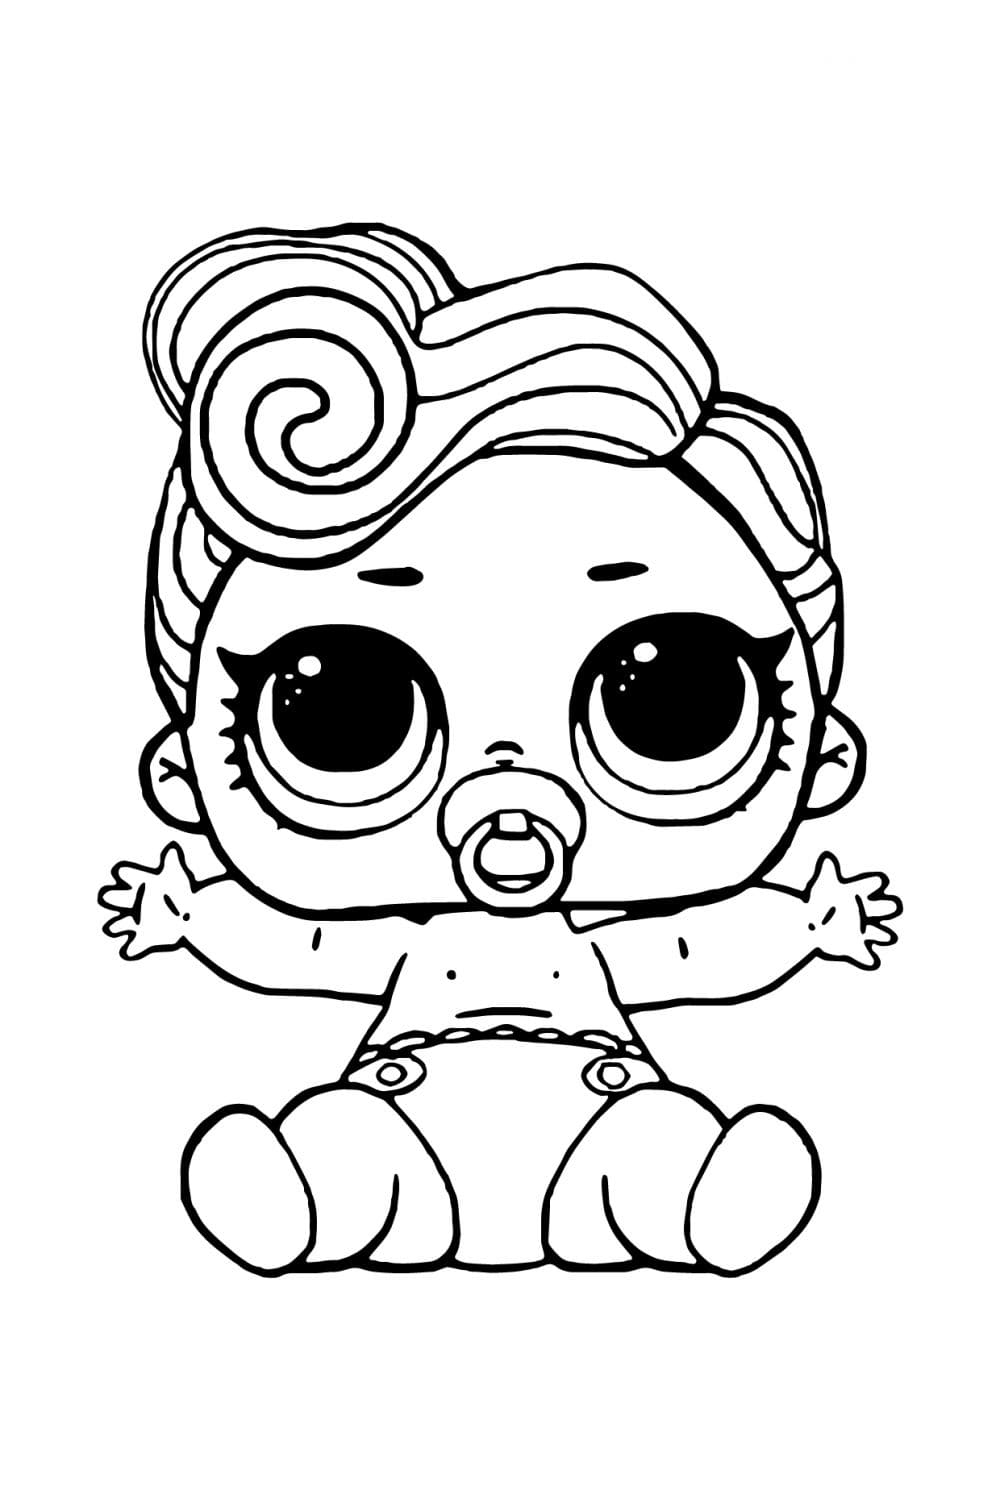 LOL Baby Cute Coloring Page - Free Printable Coloring Pages for Kids